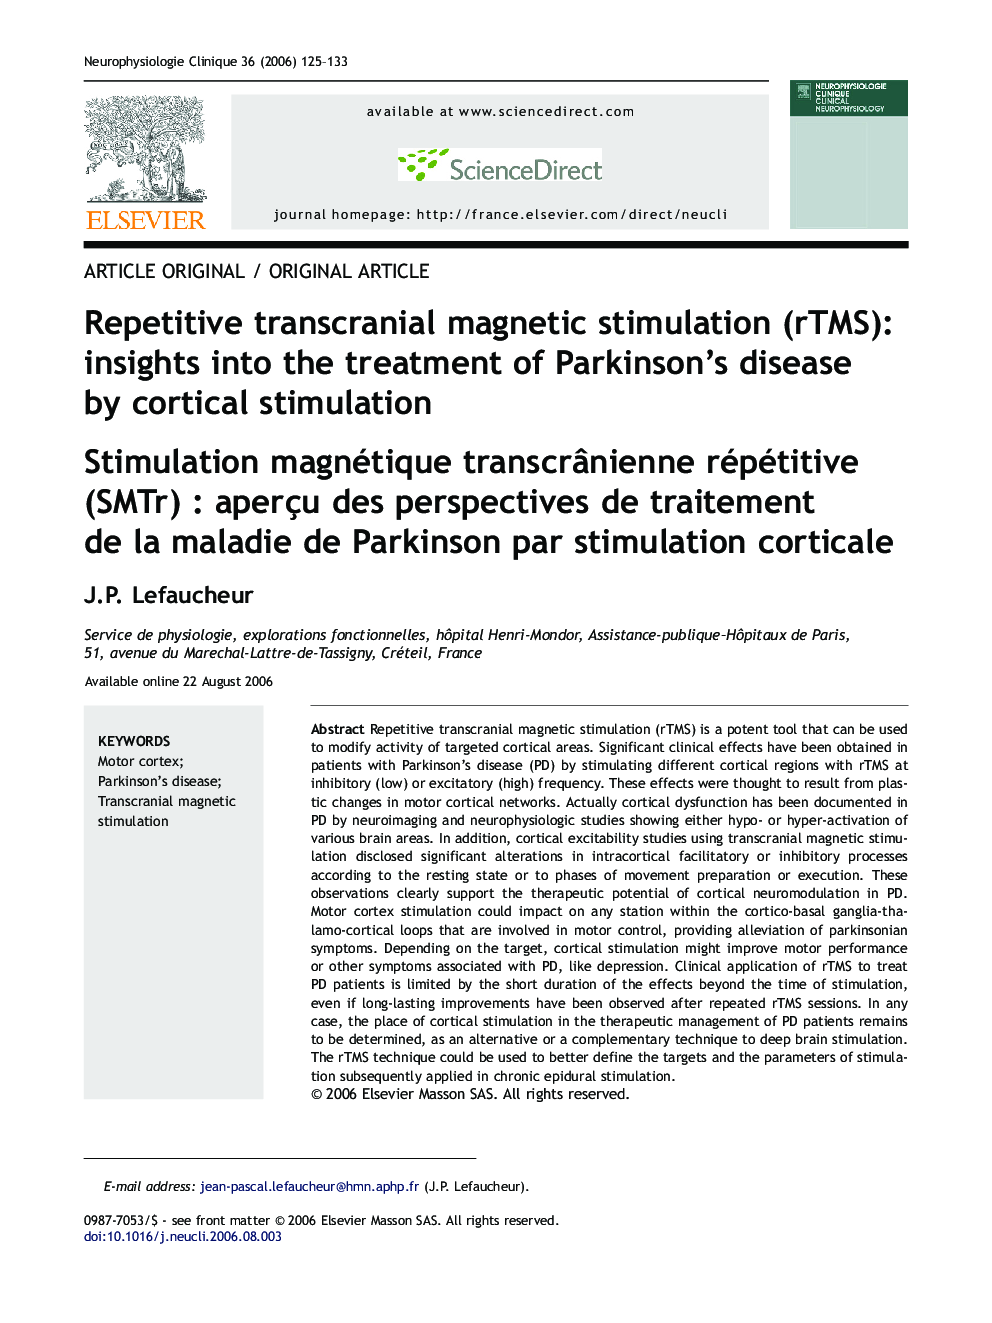 Repetitive transcranial magnetic stimulation (rTMS): insights into the treatment of Parkinson’s disease by cortical stimulation